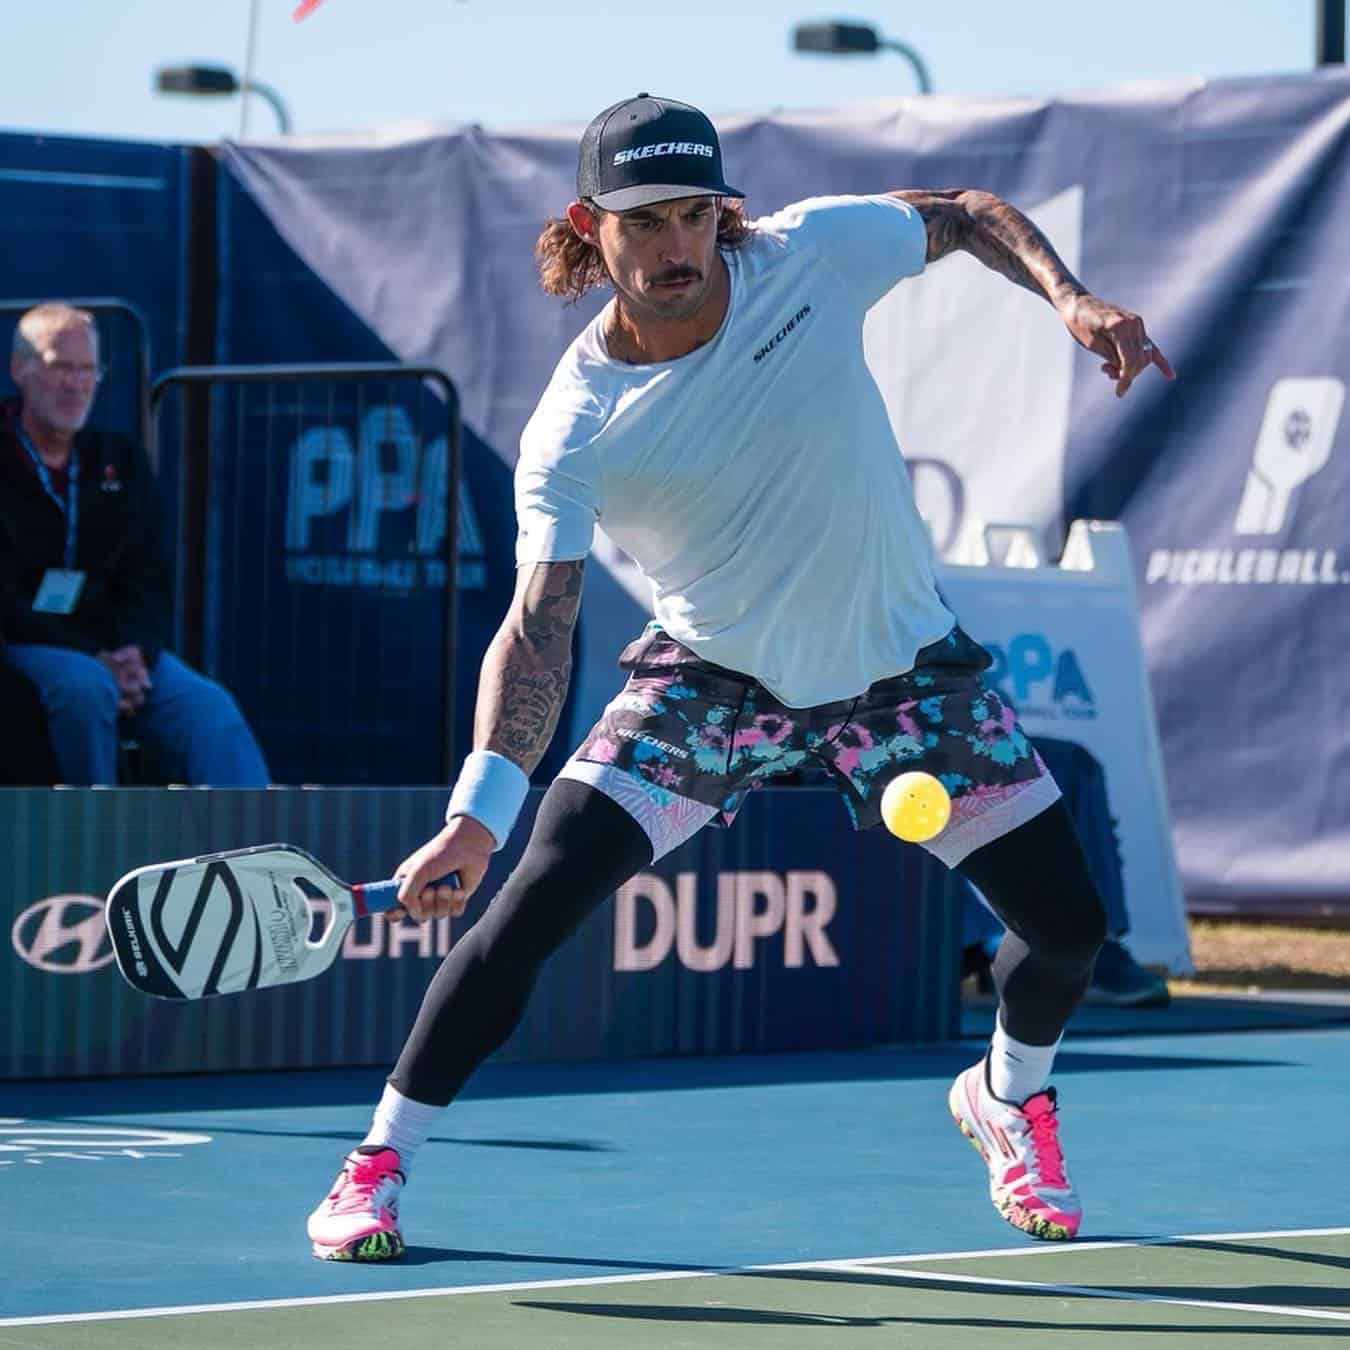 CONTINUES PICKLEBALL DOMINATION AS OFFICIAL FOOTWEAR SPONSOR OF THE CARVANA PPA TOUR | PPA Tour